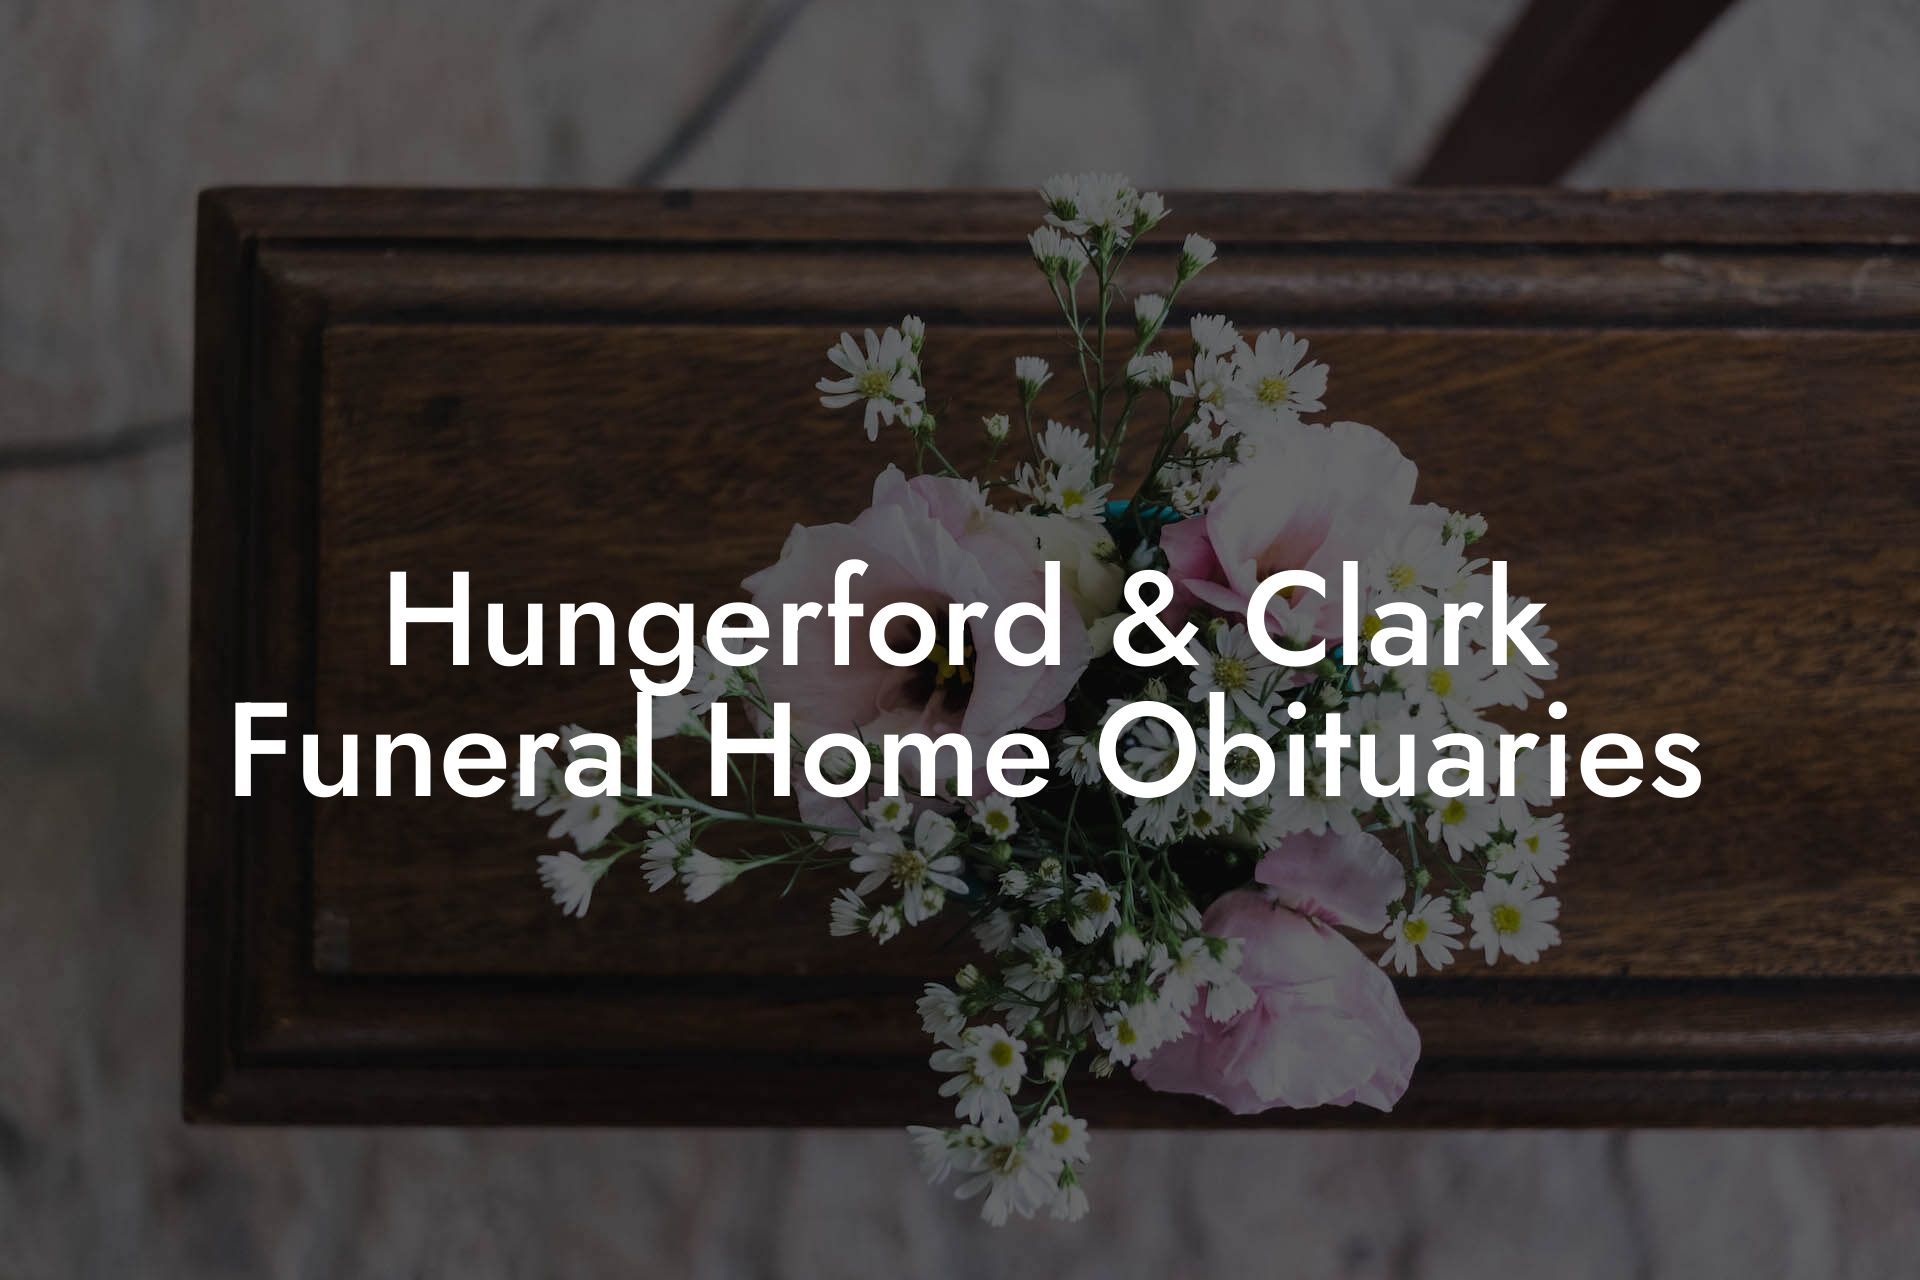 Hungerford & Clark Funeral Home Obituaries